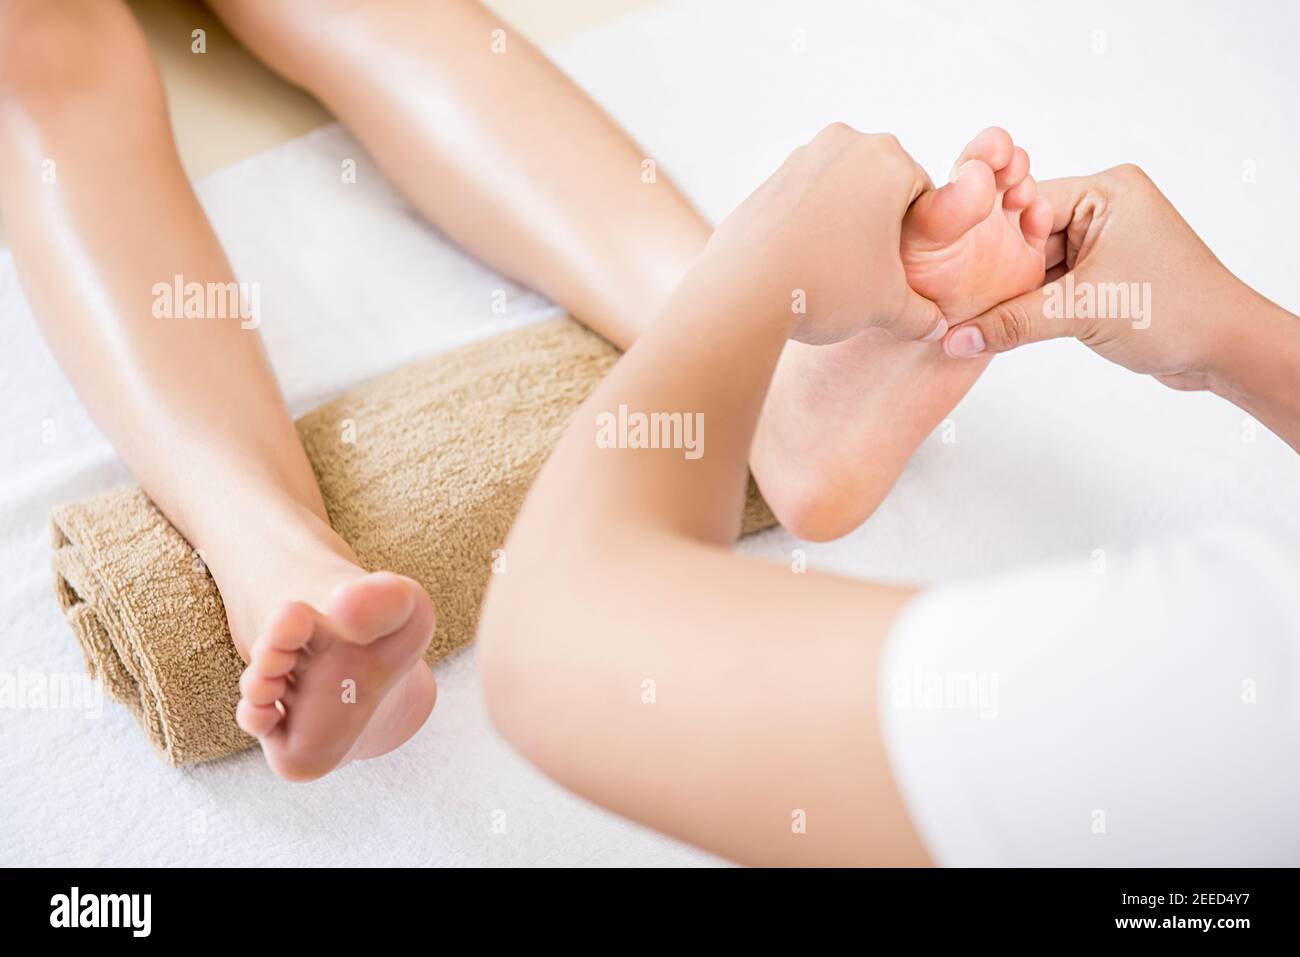 Professional therapist giving relaxing reflexology Thai foot massage treatment to a woman in spa Stock Photo